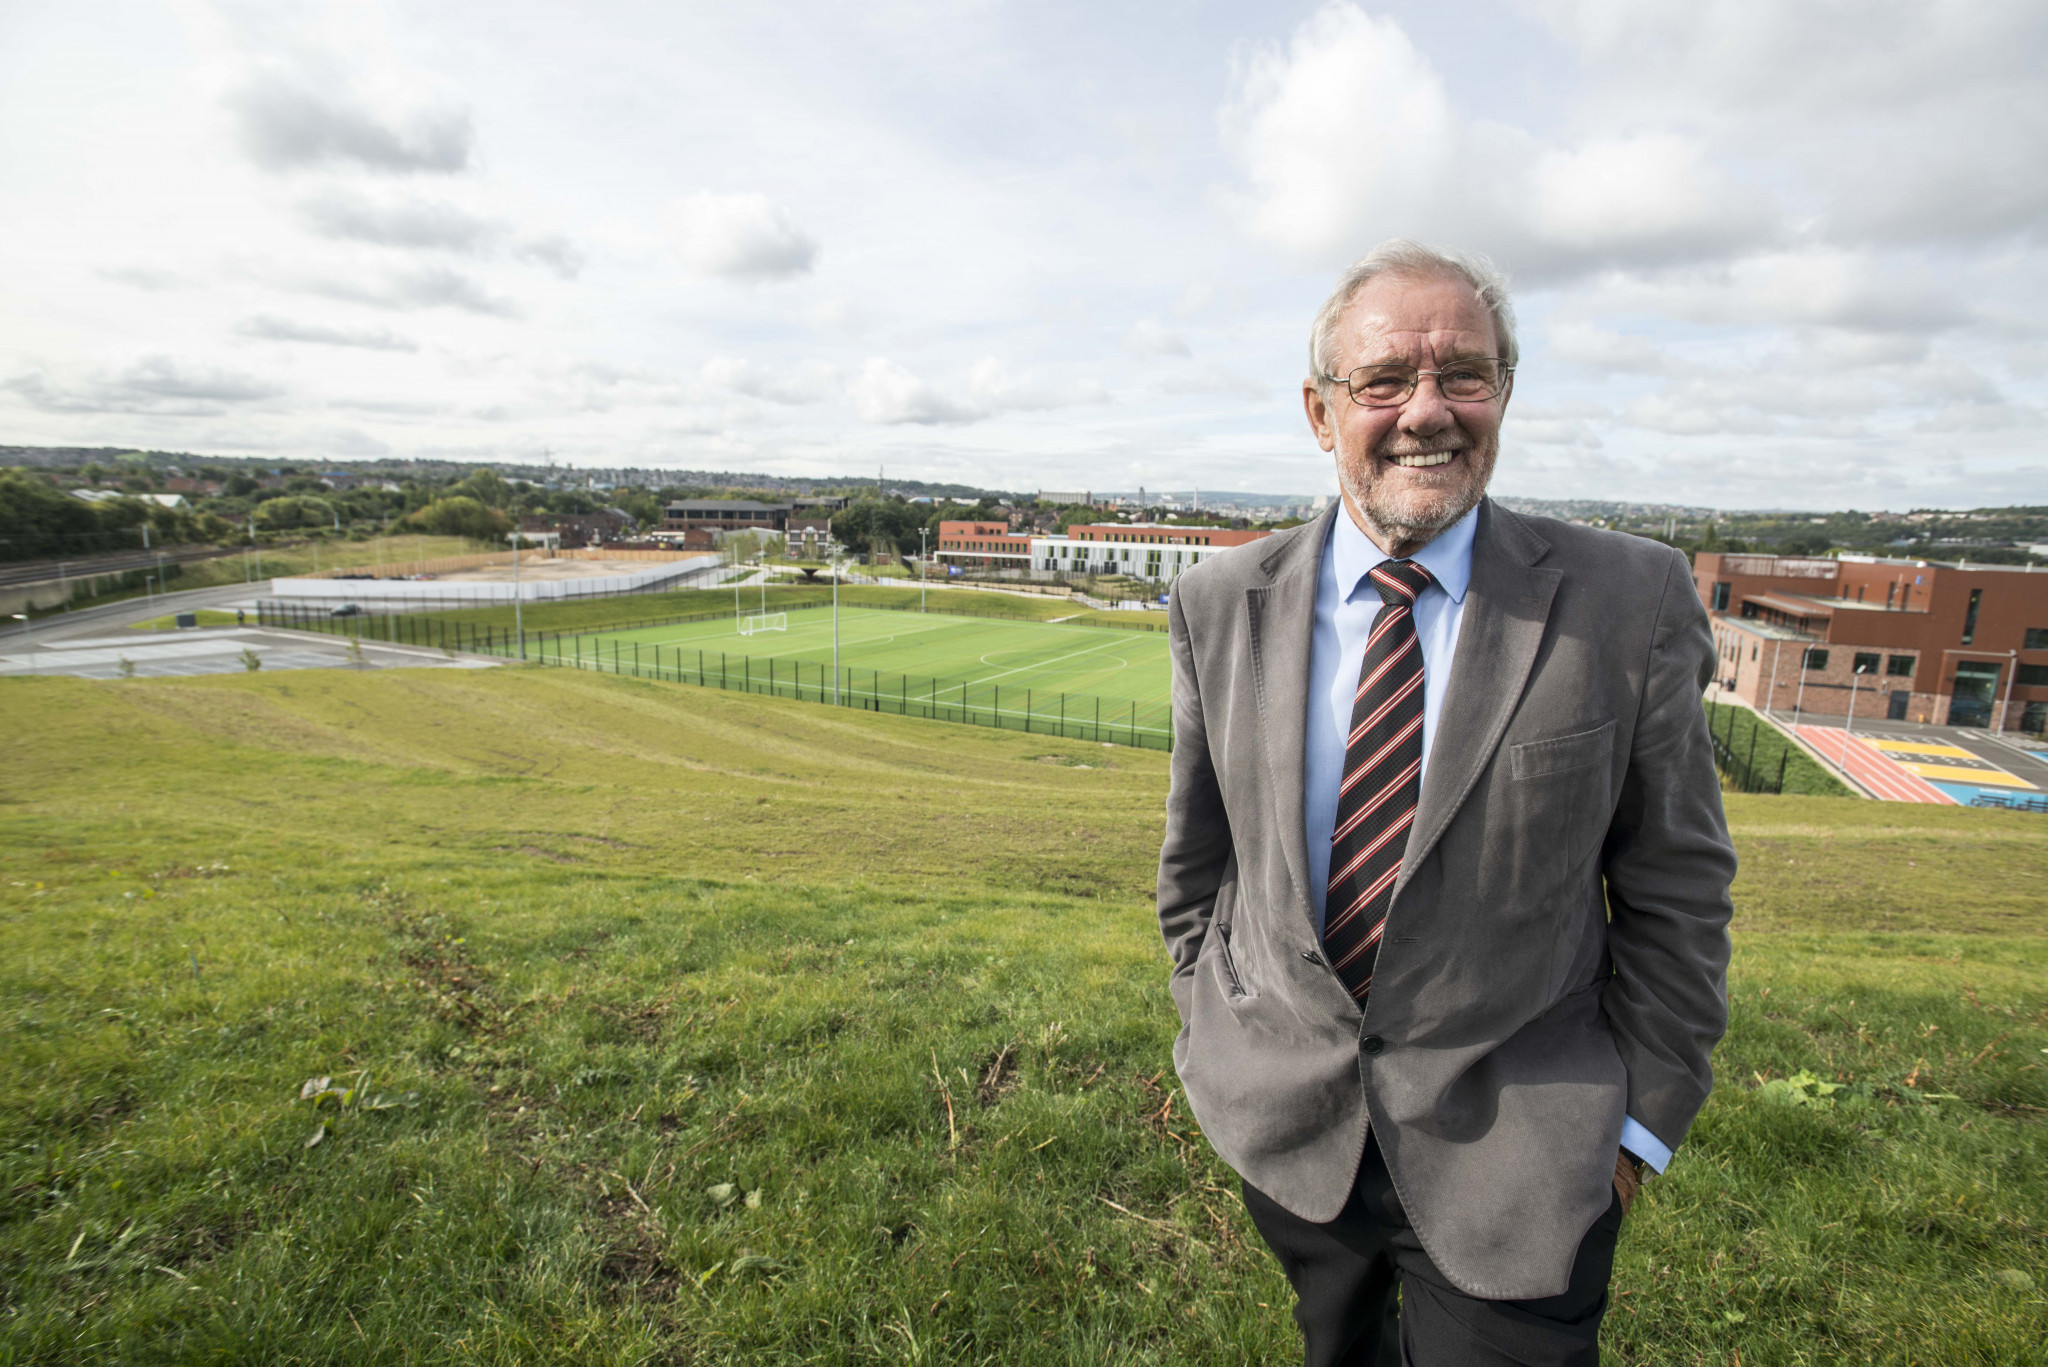 Former Sports Minister Richard Caborn has outlined the benefits of a London 2012 Olympic Games legacy project ©Olympic Legacy Park